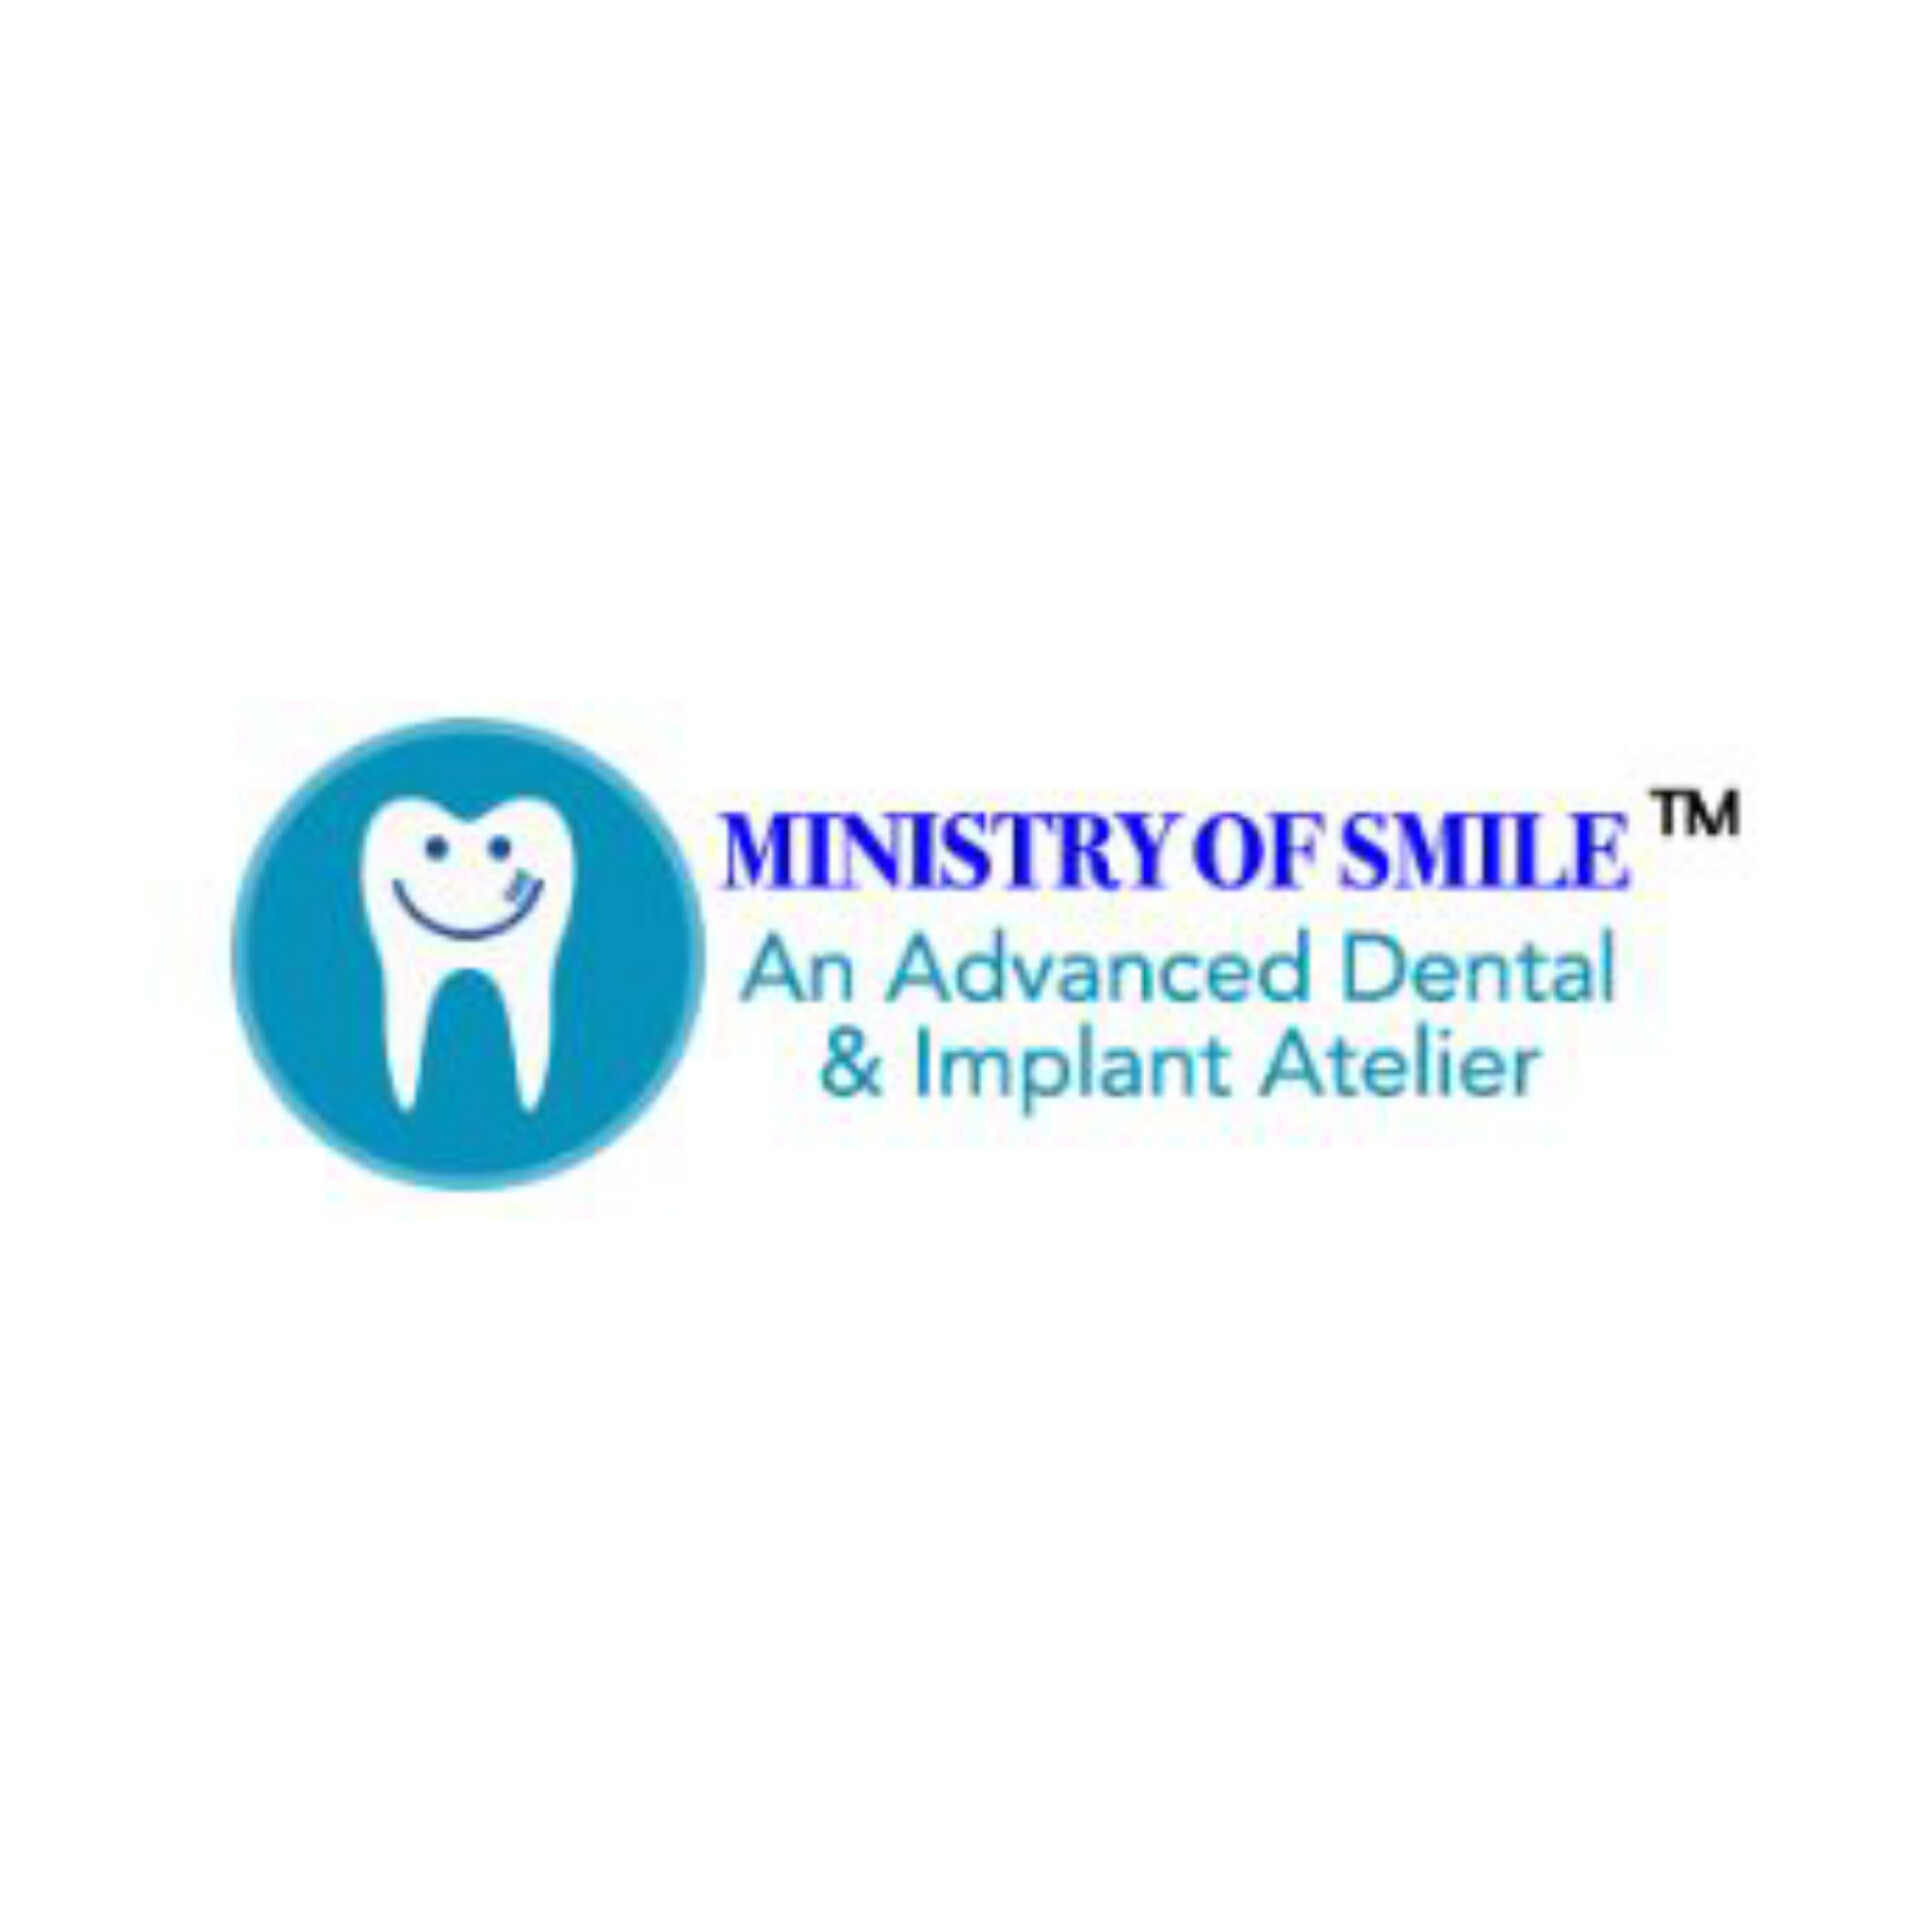 Ministry of Smile|Healthcare|Medical Services